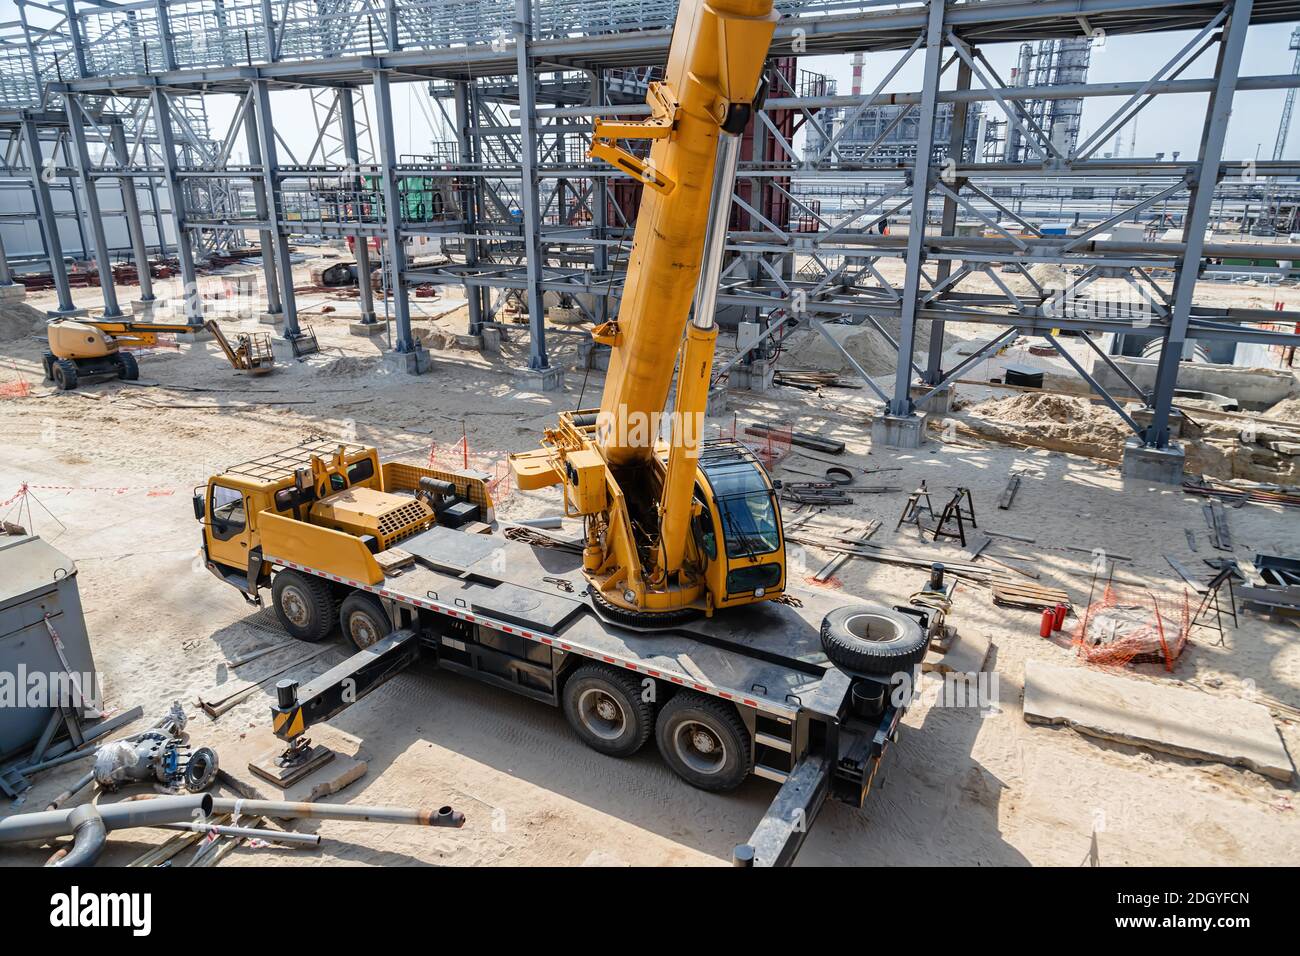 A large yellow car crane stands on the construction site Stock Photo